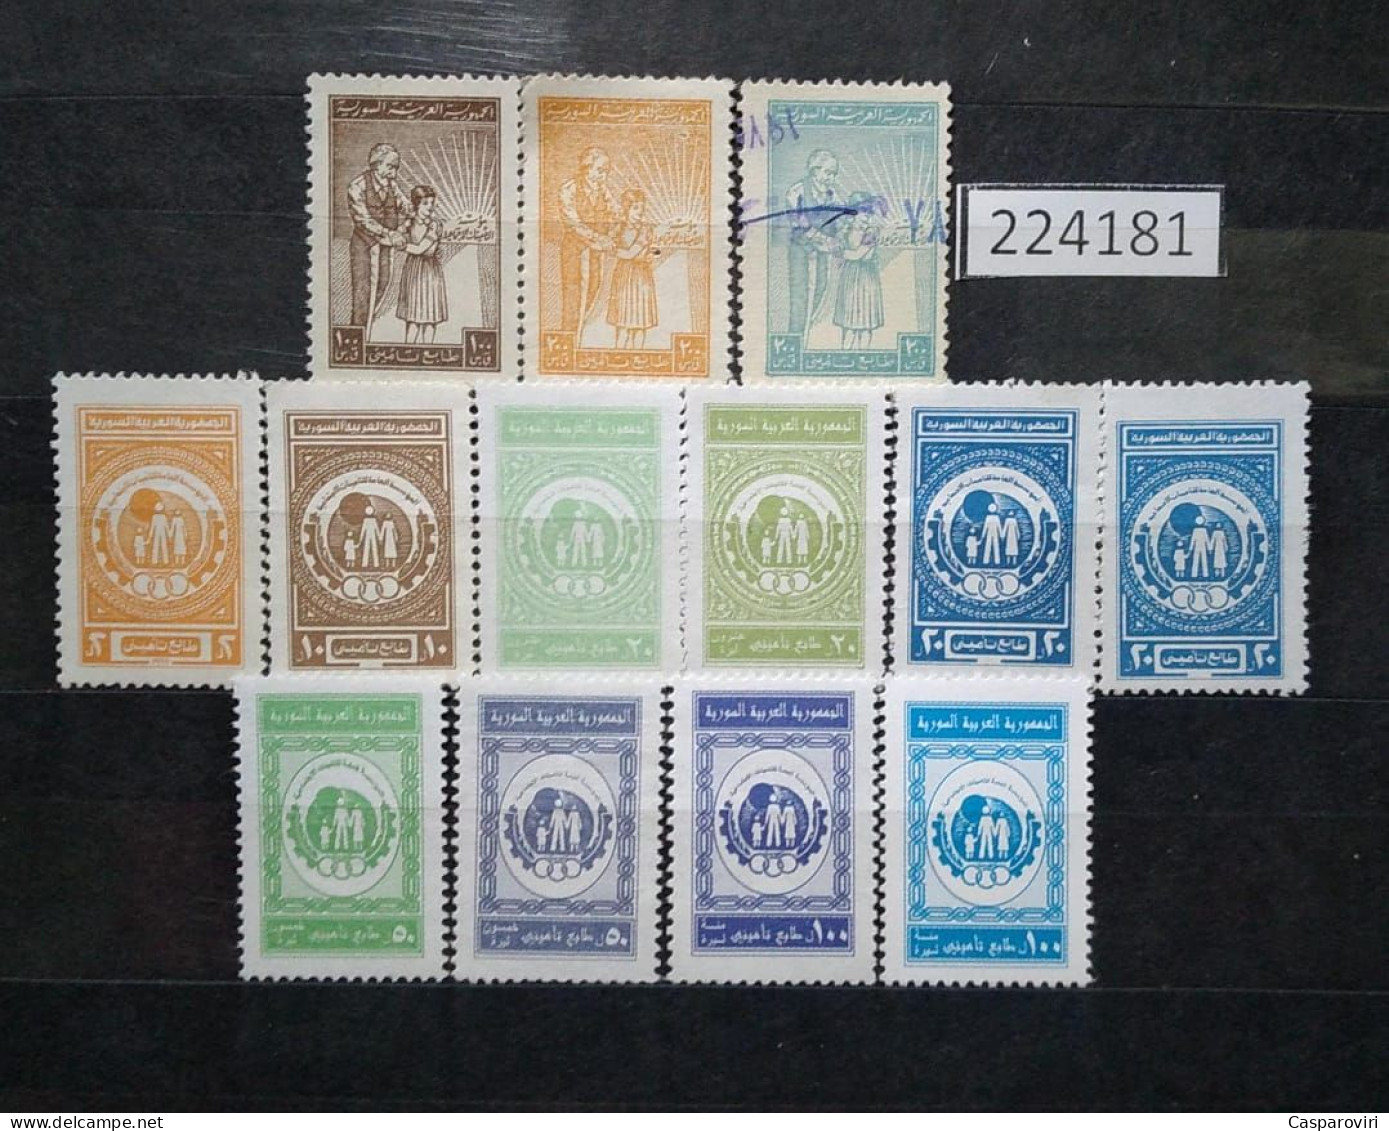 224181; Syria; Revenue Stamps; Full Set Of Insurance Stamps; Social Security Establishment; Fiscal; 13 Stamp; Mixed - Syrie